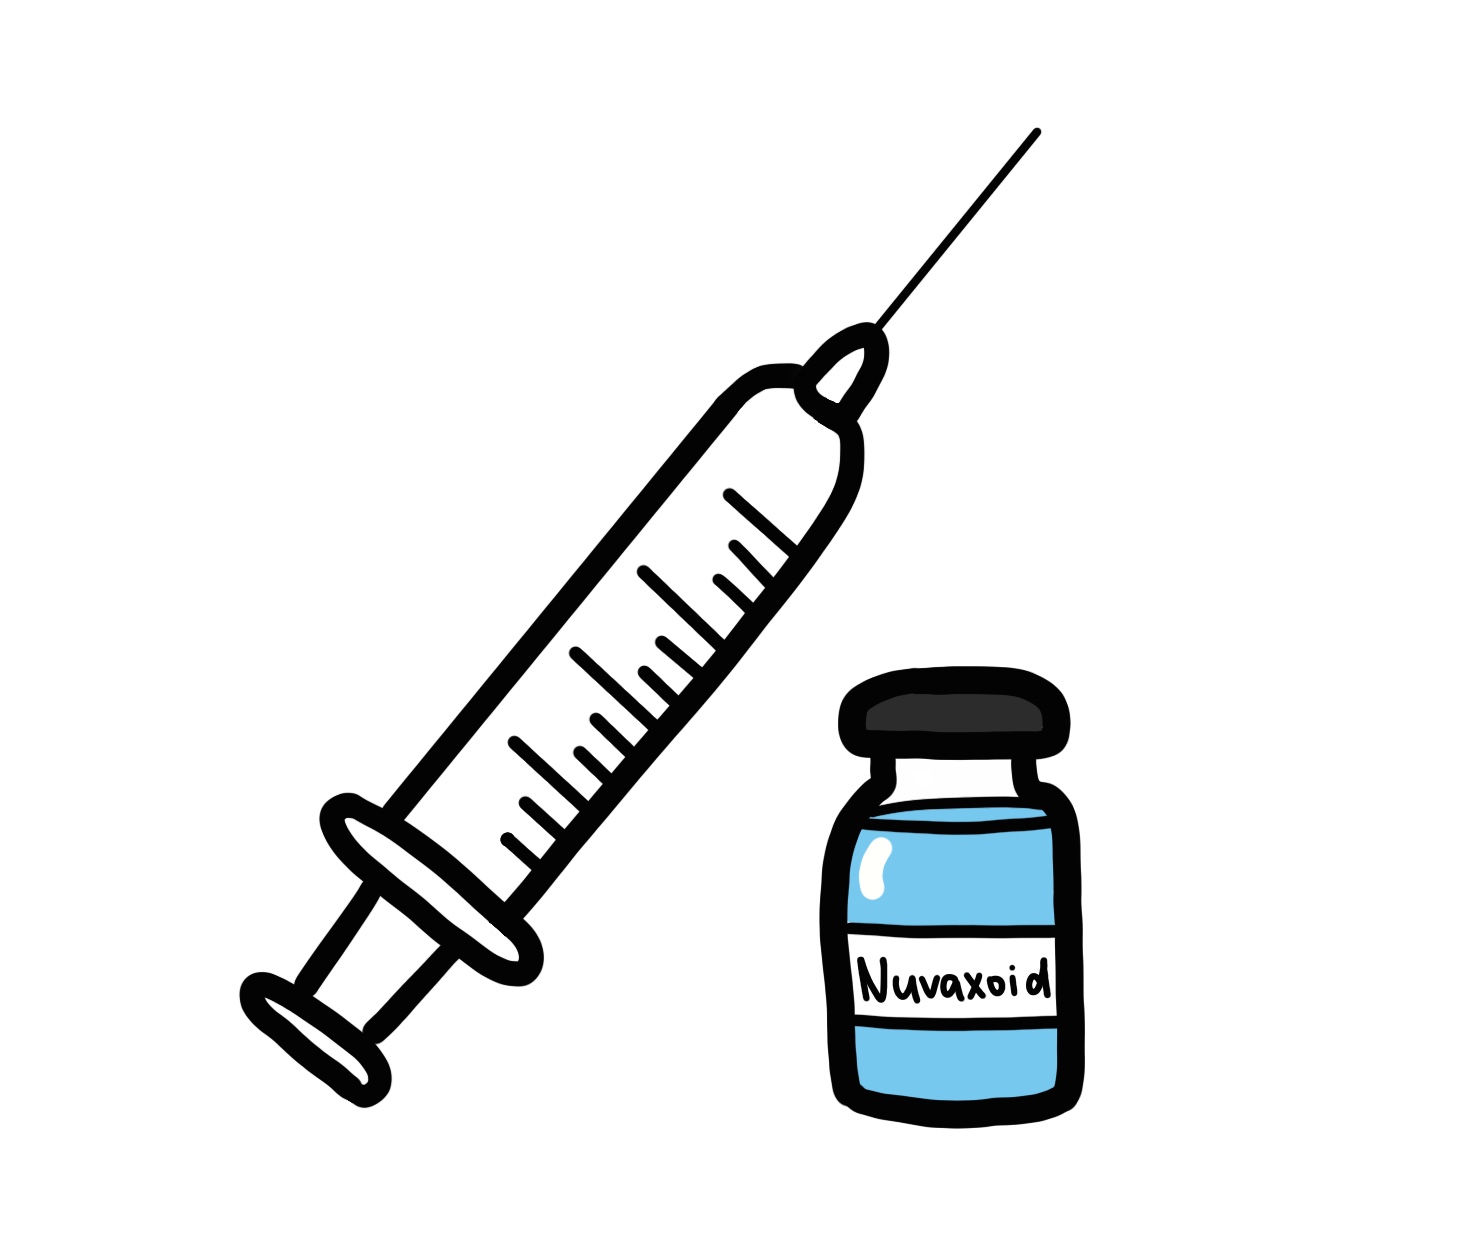 Novavax, a biotech company based in Maryland, announced on Nov. 28 that the World Health Organization had given its Nuvaxoid COVID-19 vaccine Emergency Use for insurance nagListing. 